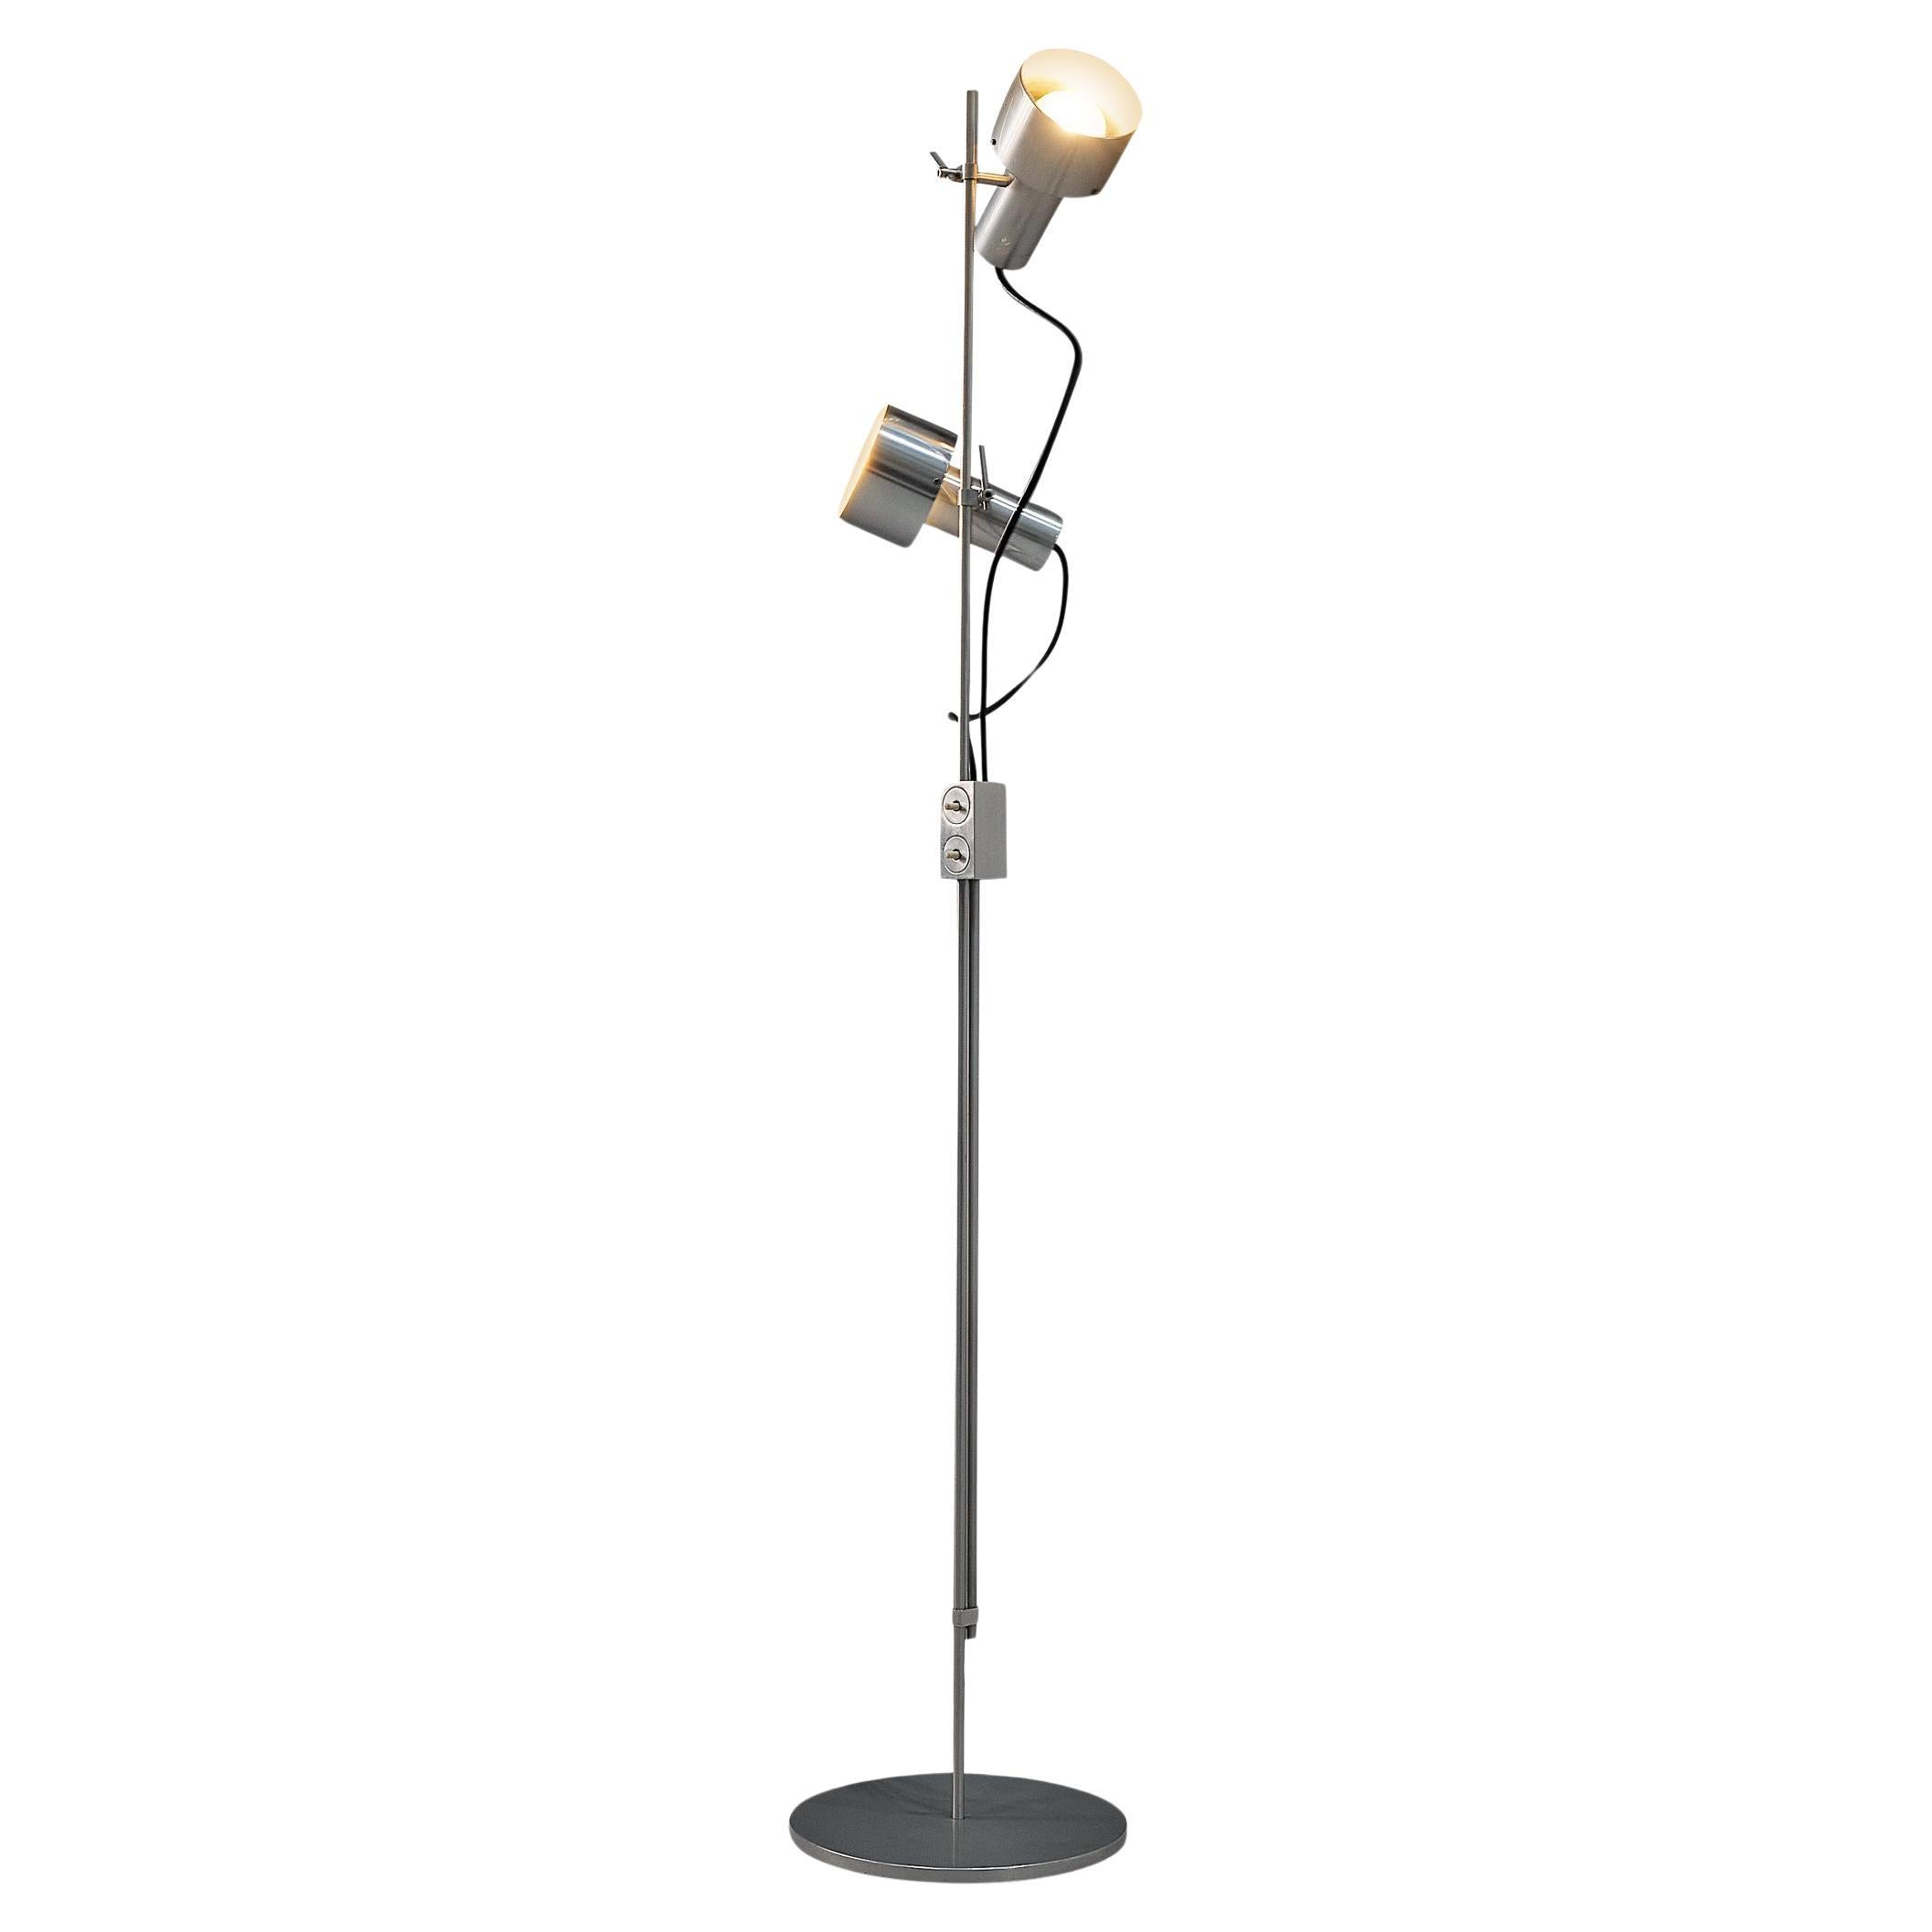 Peter Nelson for Architectural Lightning Minimalist Floor Lamp in Aluminum  For Sale